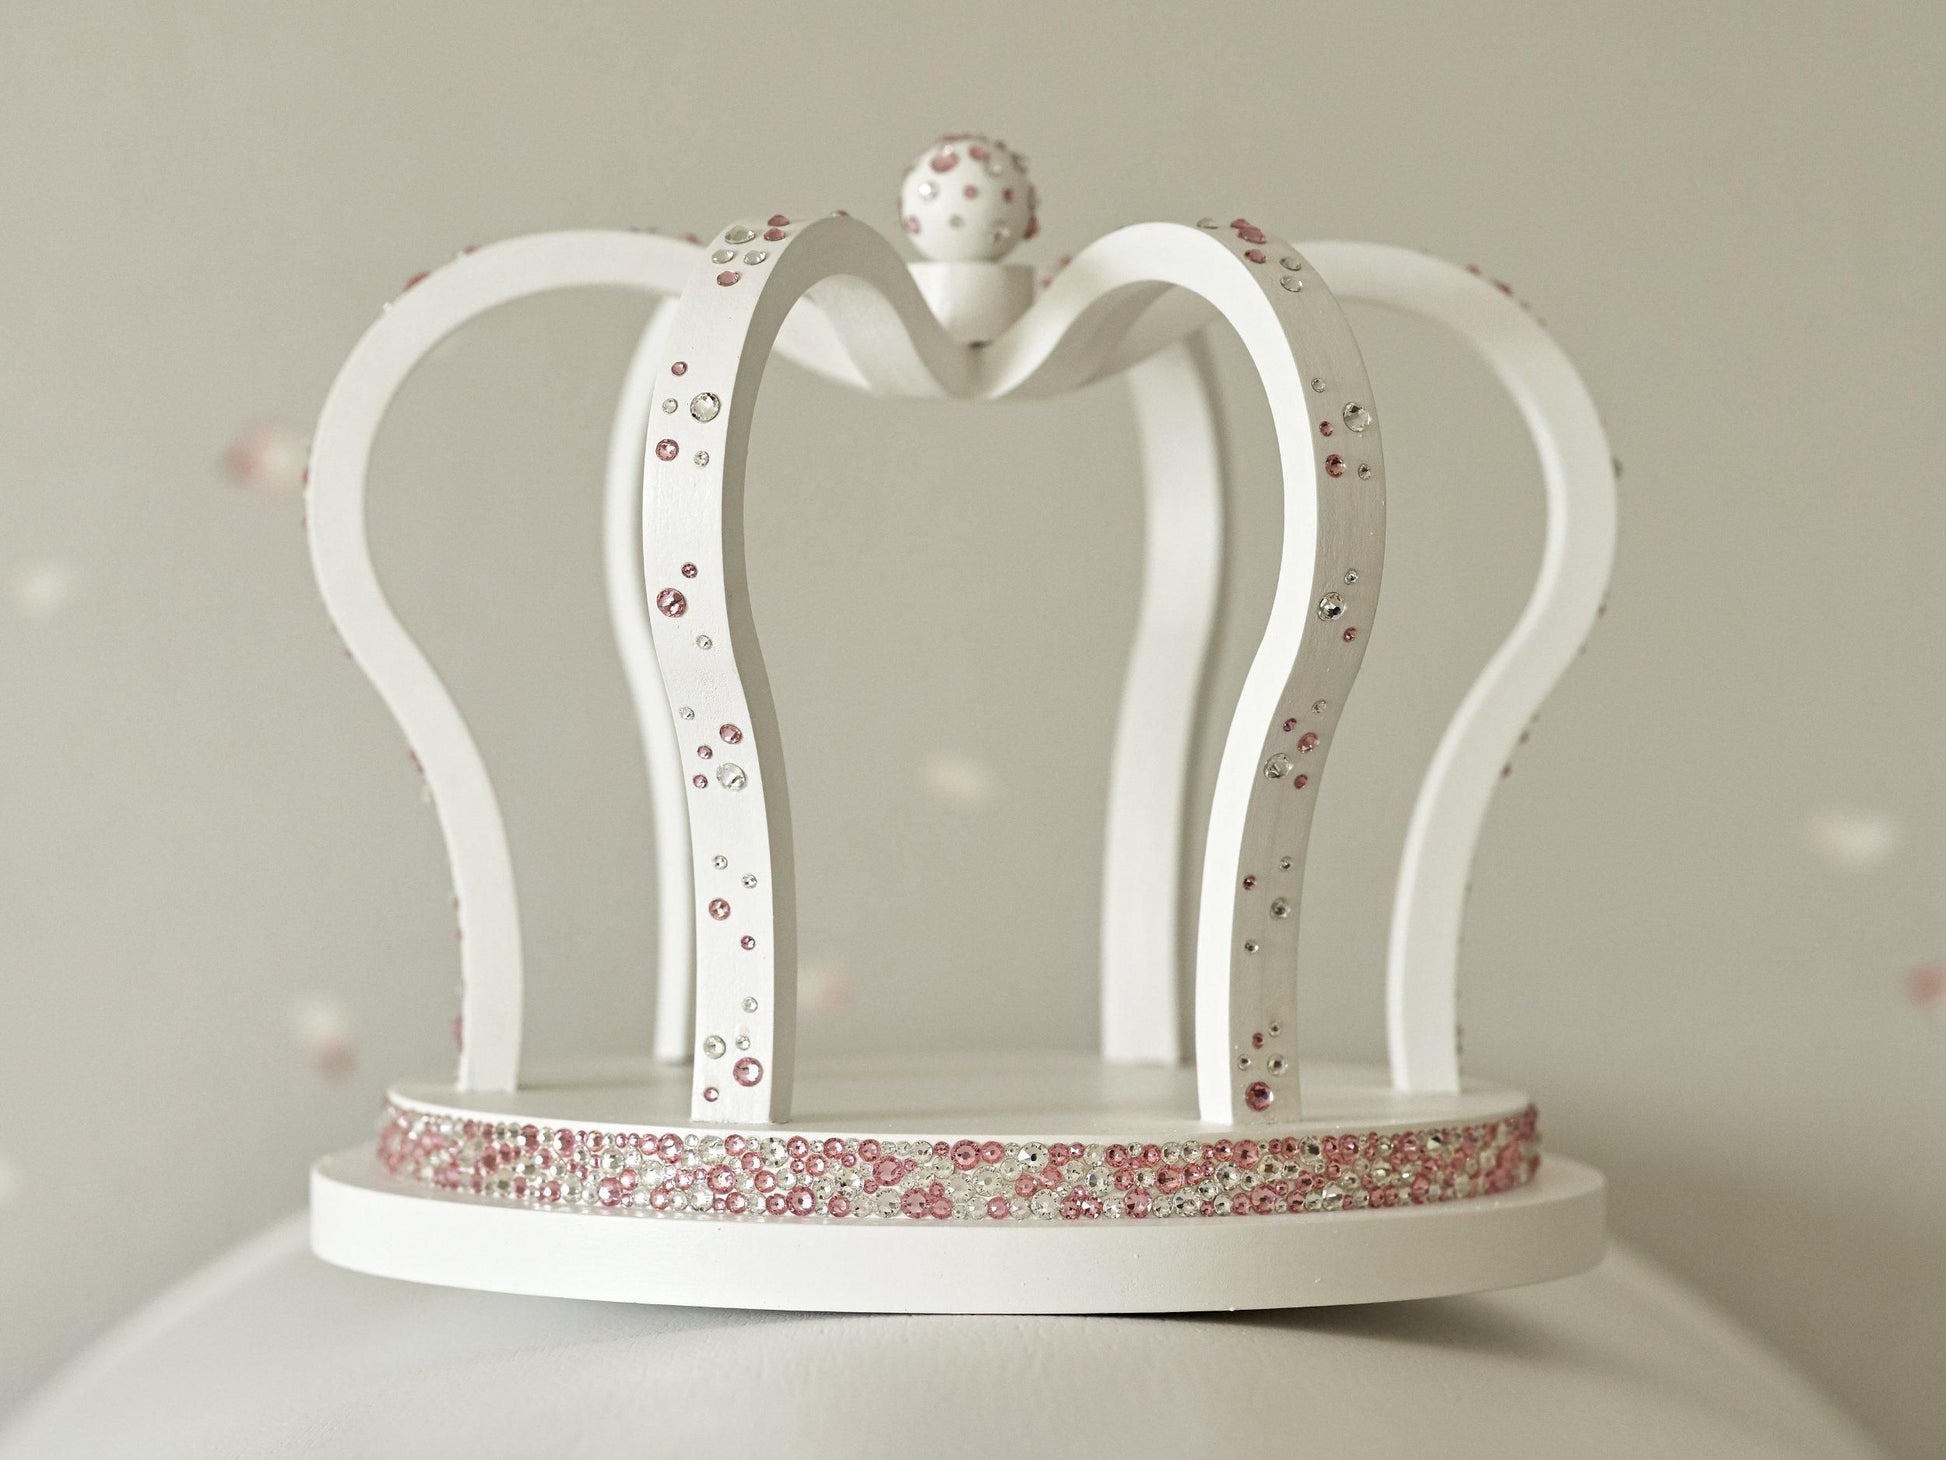 Princess Carriage Bed - White wooden Cinderella bed with crown | Dragons of Walton Street